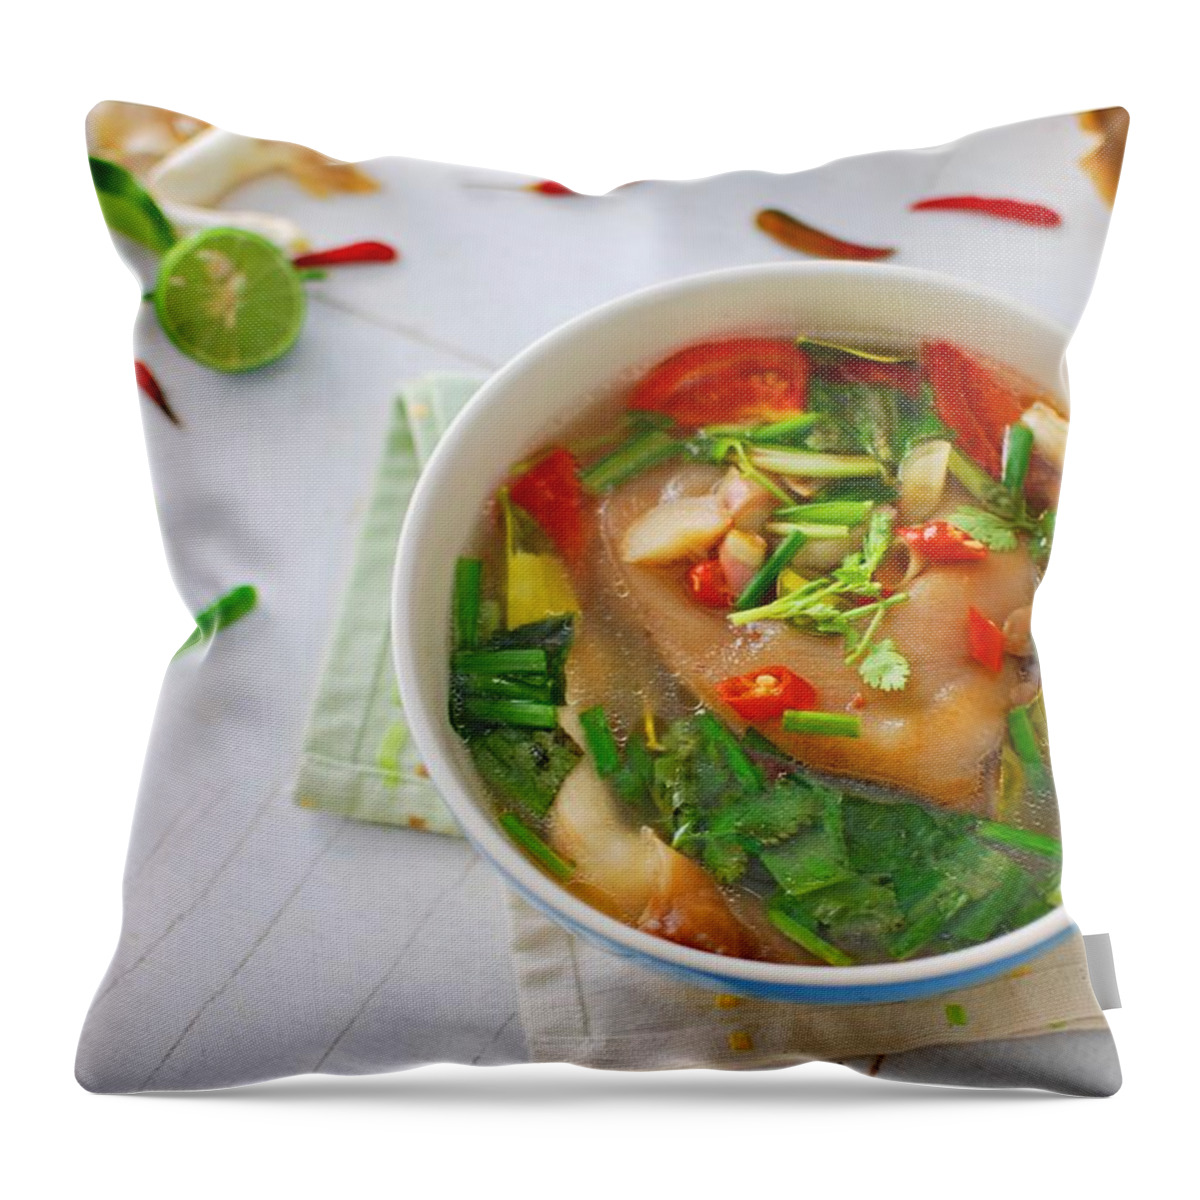 Thai Food Throw Pillow featuring the photograph Tom Yum Pork Knuckle by Hoaixh